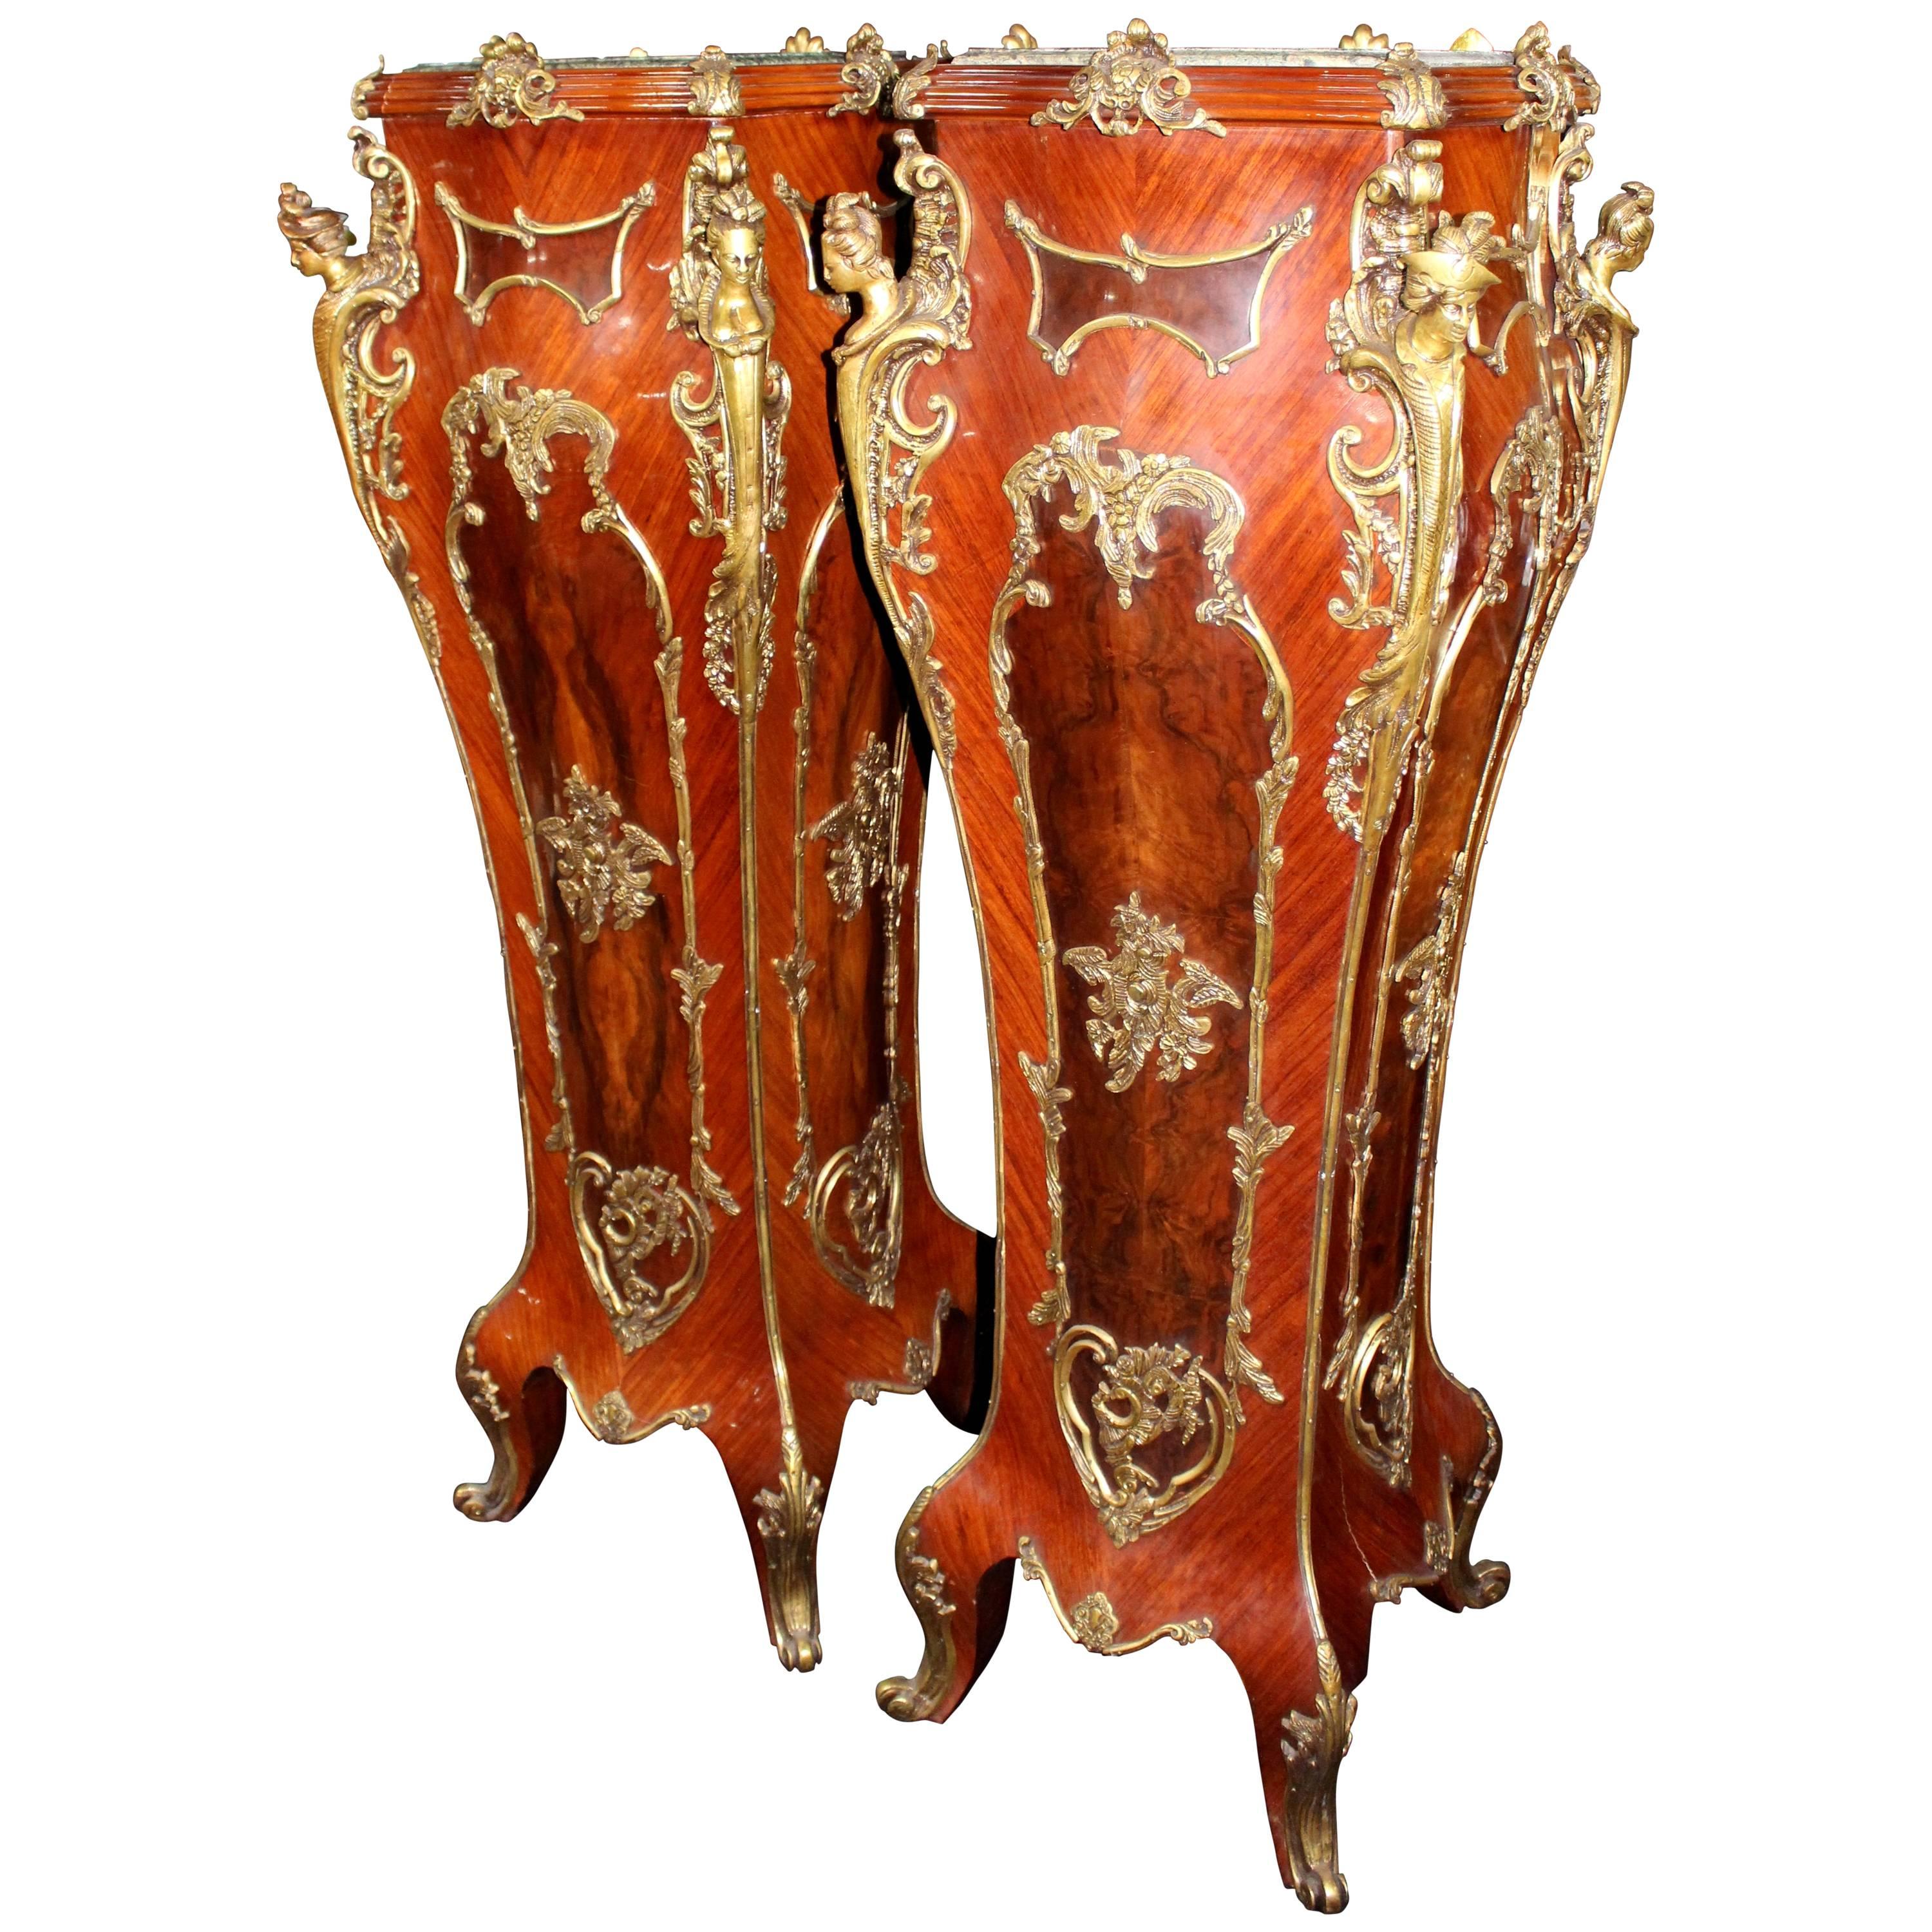 Pair of Louis XV Style Marble-Topped Ormolu-Mounted Inlaid Pedestals